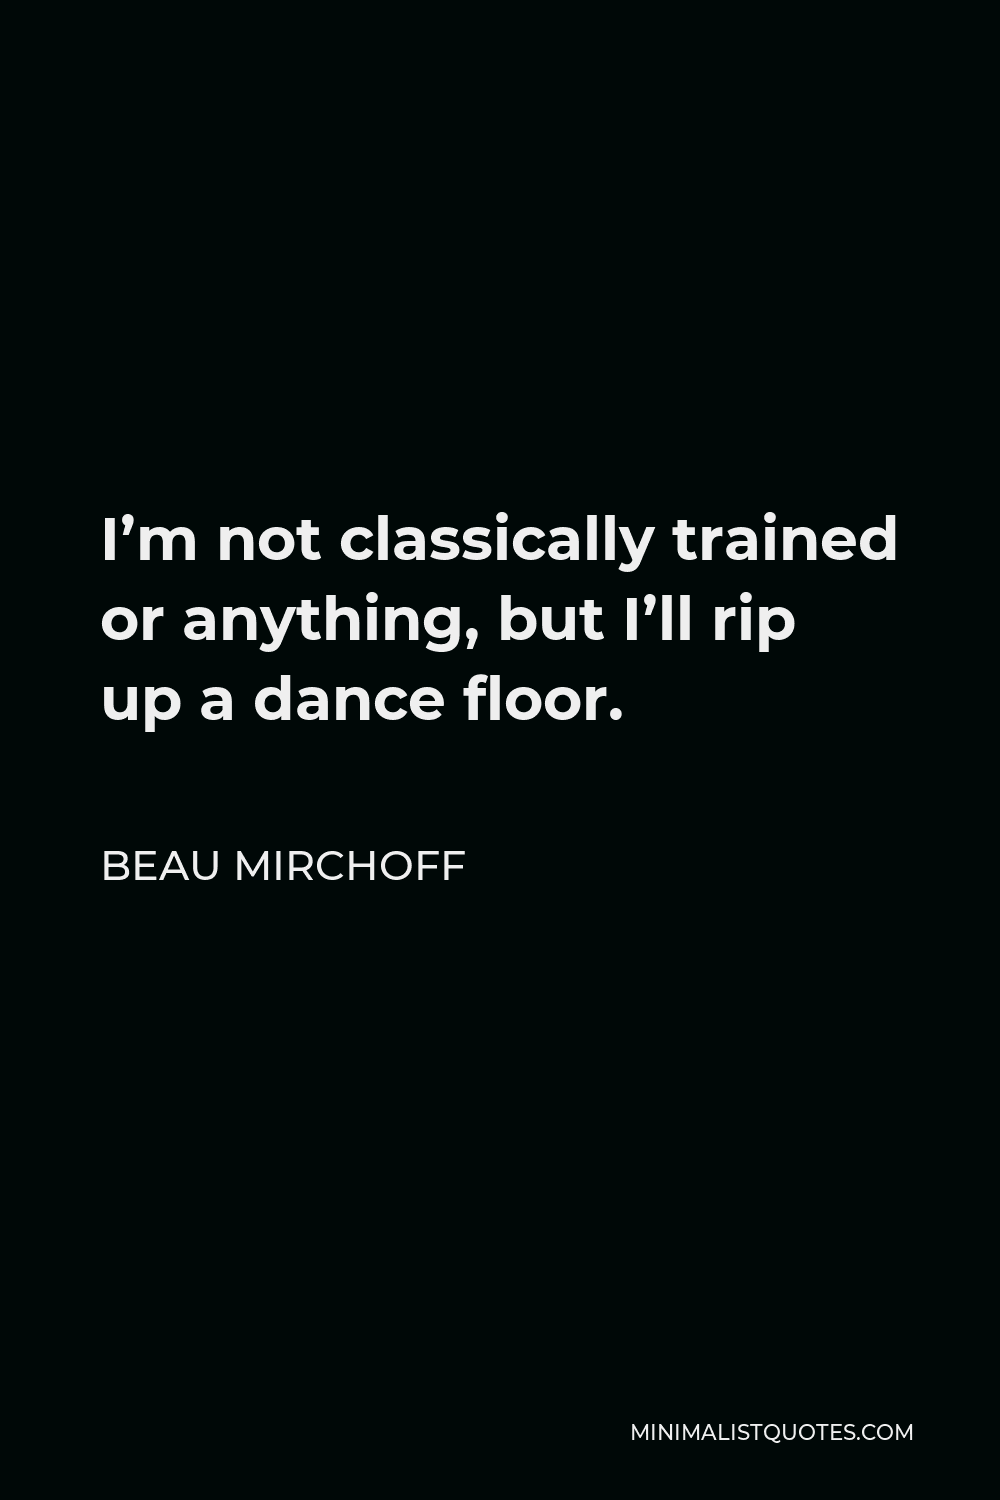 Beau Mirchoff Quote - I’m not classically trained or anything, but I’ll rip up a dance floor.